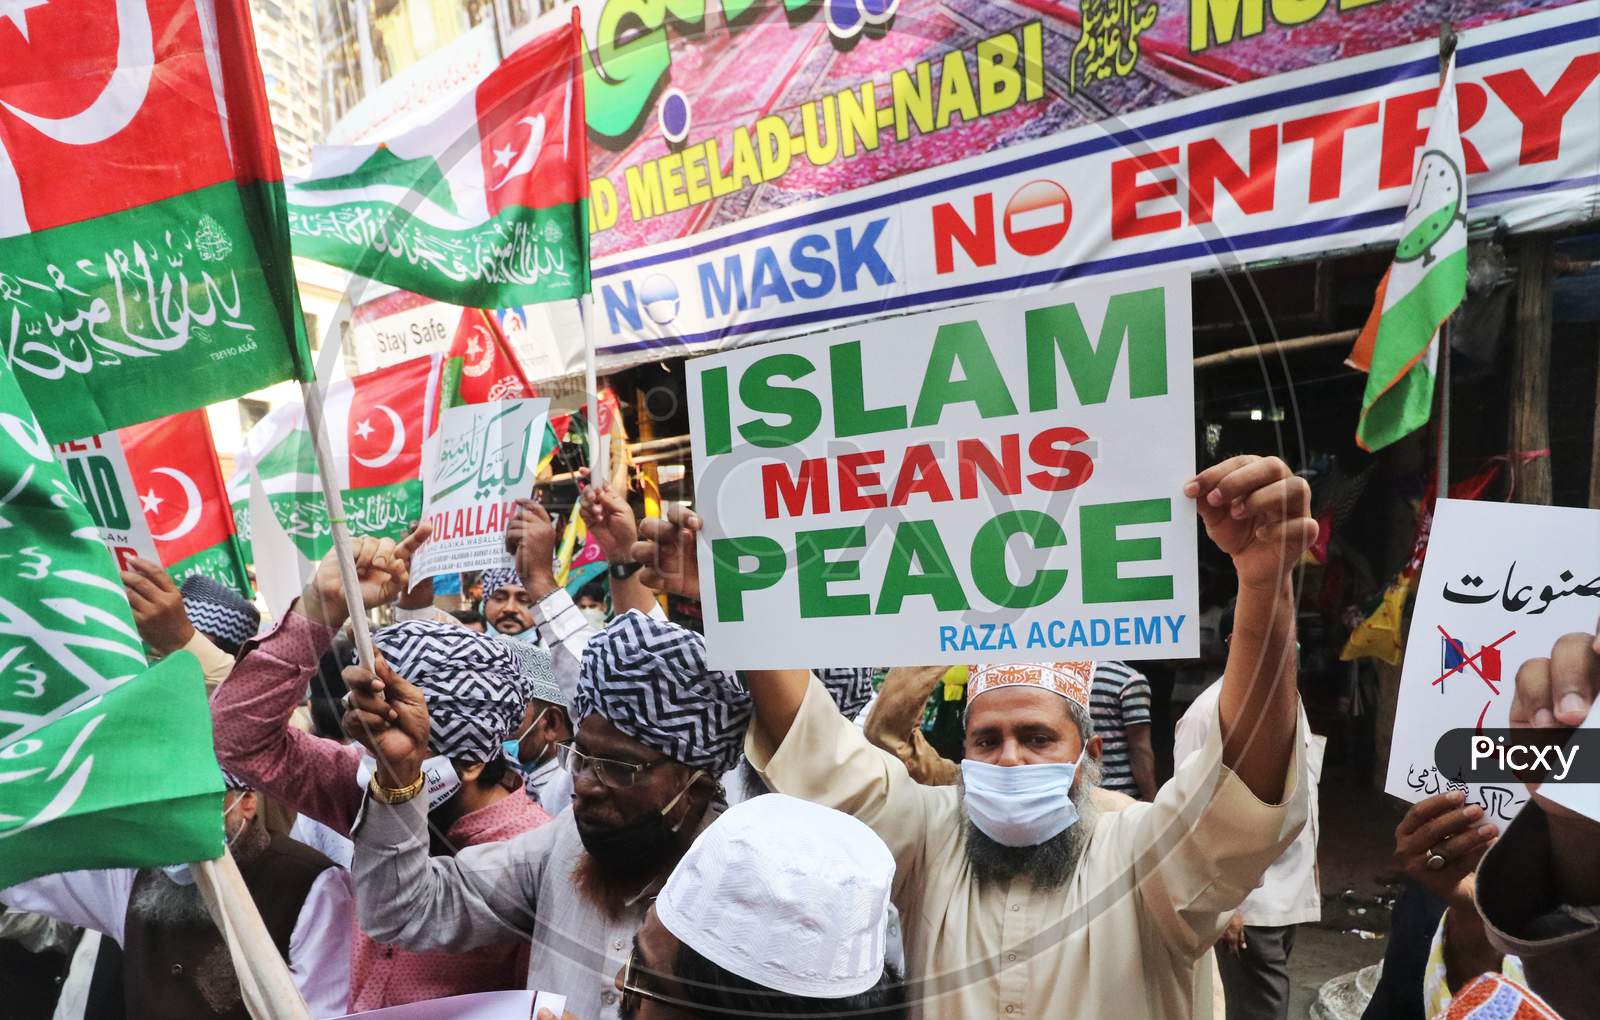 People hold placards and shout slogans during a protest against the publication of and French President Emmanuel Macron's comments over Muslim's Prophet Muhammad's caricatures, in Mumbai, India, October 28, 2020.